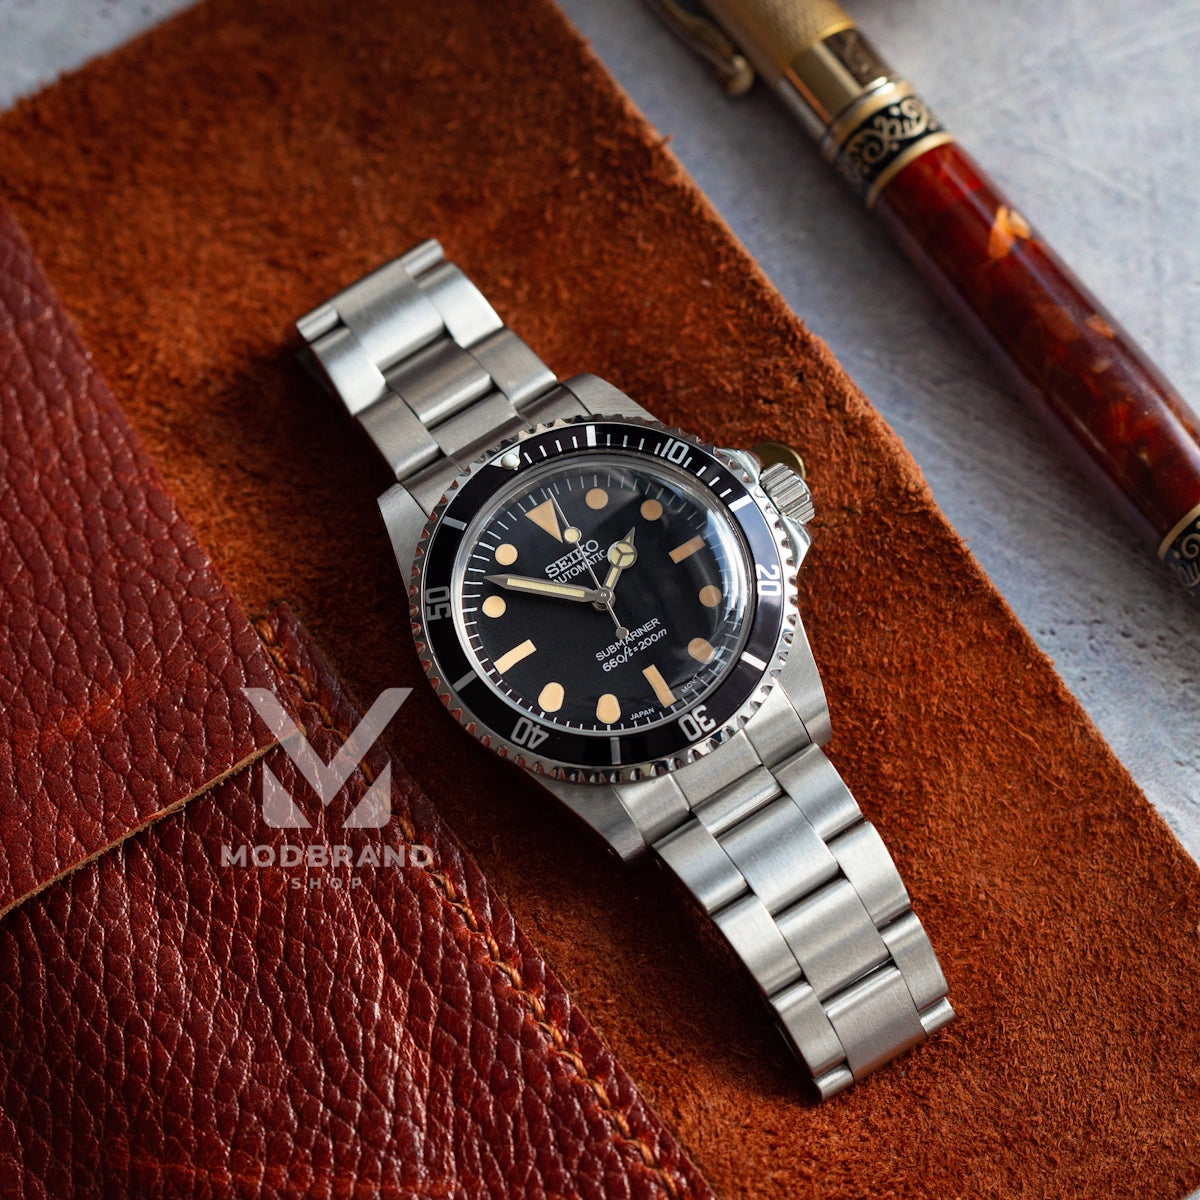 Seiko Mod Submariner T Dial Watch in Vintage Military Style